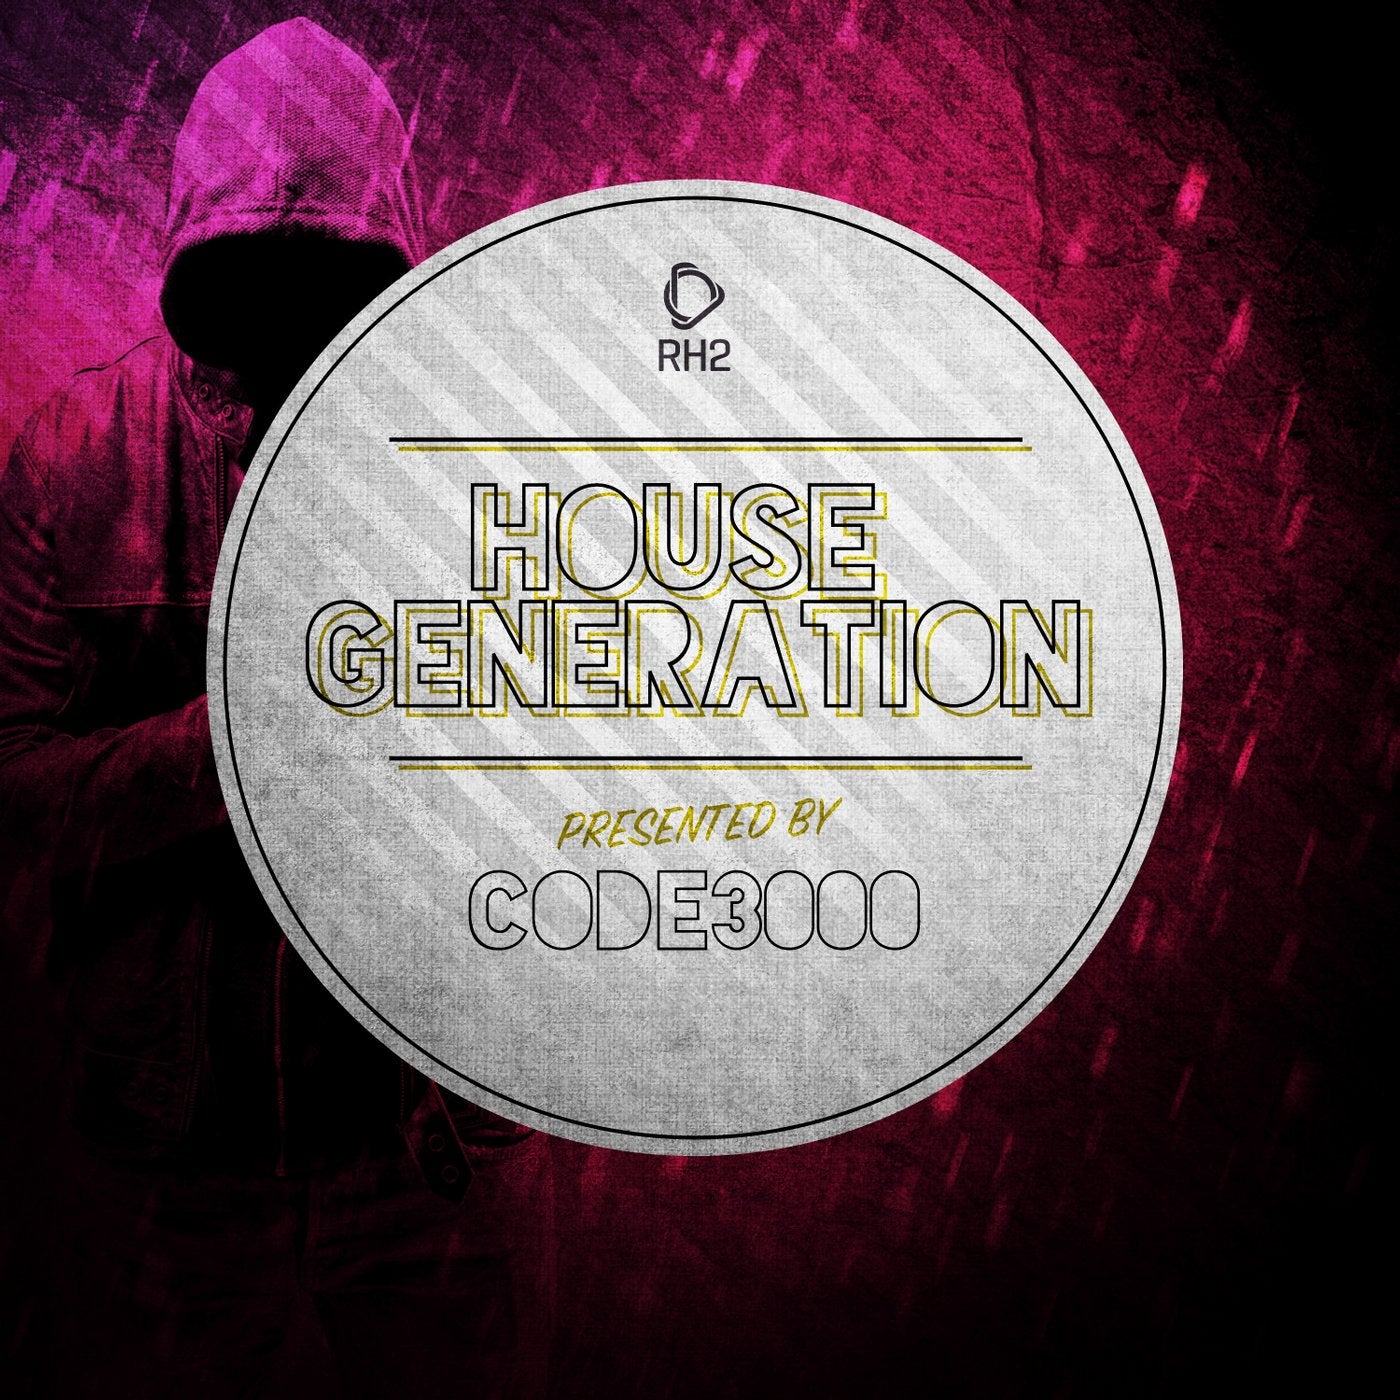 House Generation pres. by Code3000